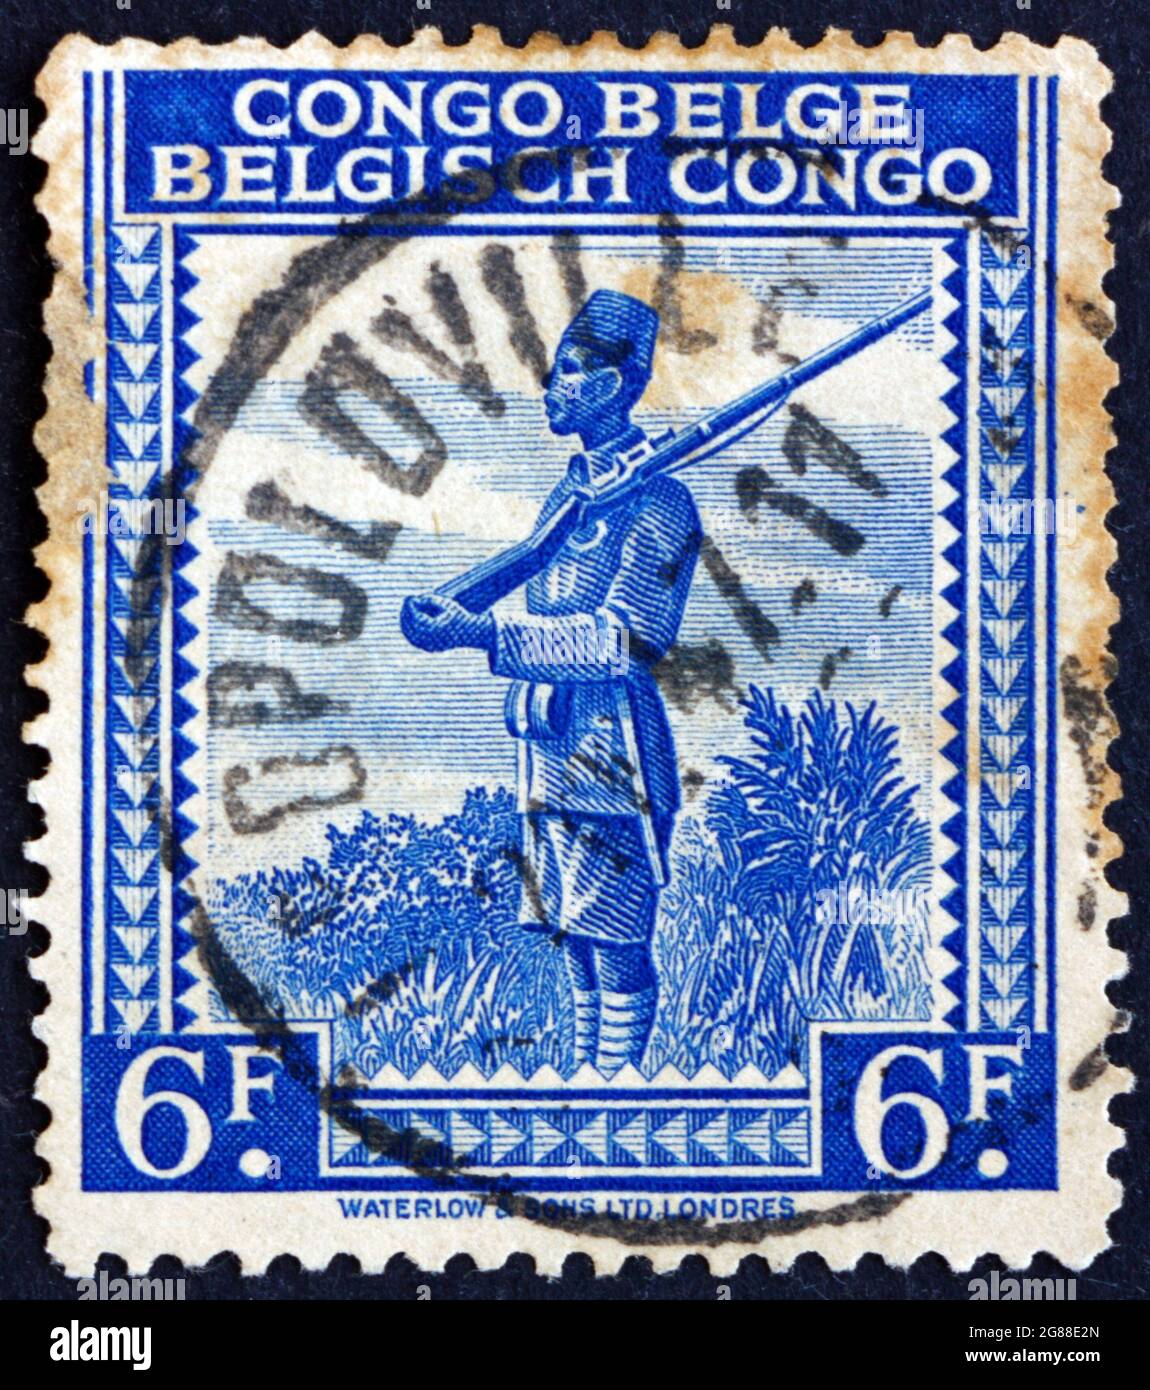 BELGIAN CONGO - CIRCA 1942: a stamp printed in Belgian Congo shows Askari, local soldier serving in the army of the European colonial power in Africa, Stock Photo